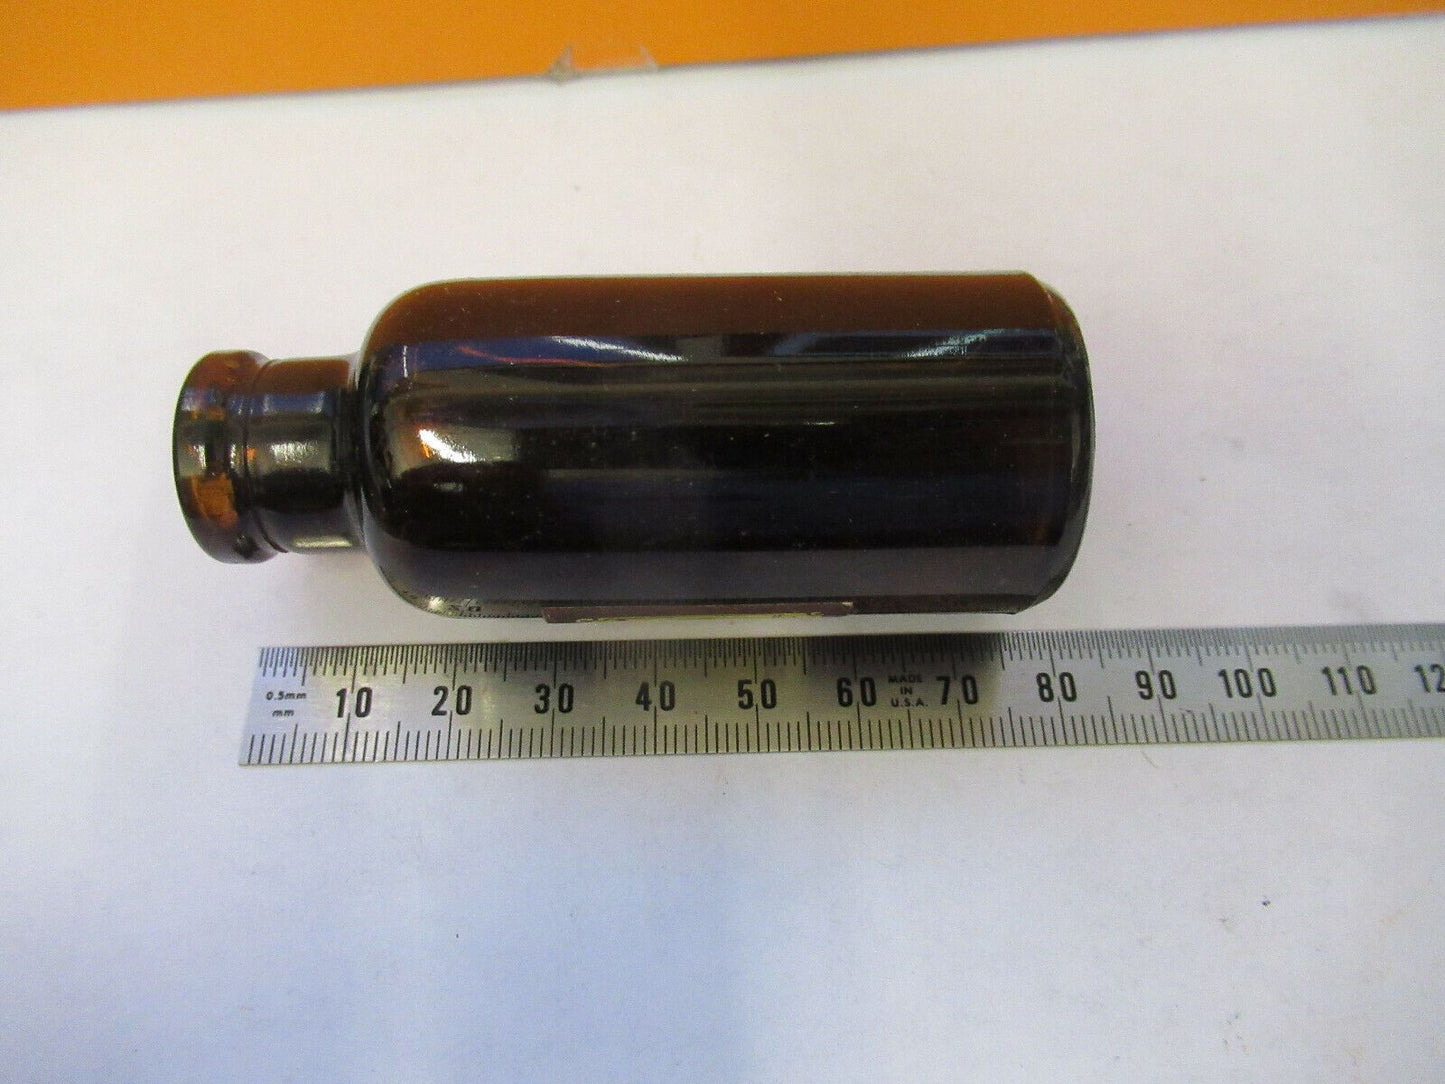 ANTIQUE FLASK HARTMAN METHYL CONTAINER MICROSCOPE PART AS PICTURED &F9-A-12